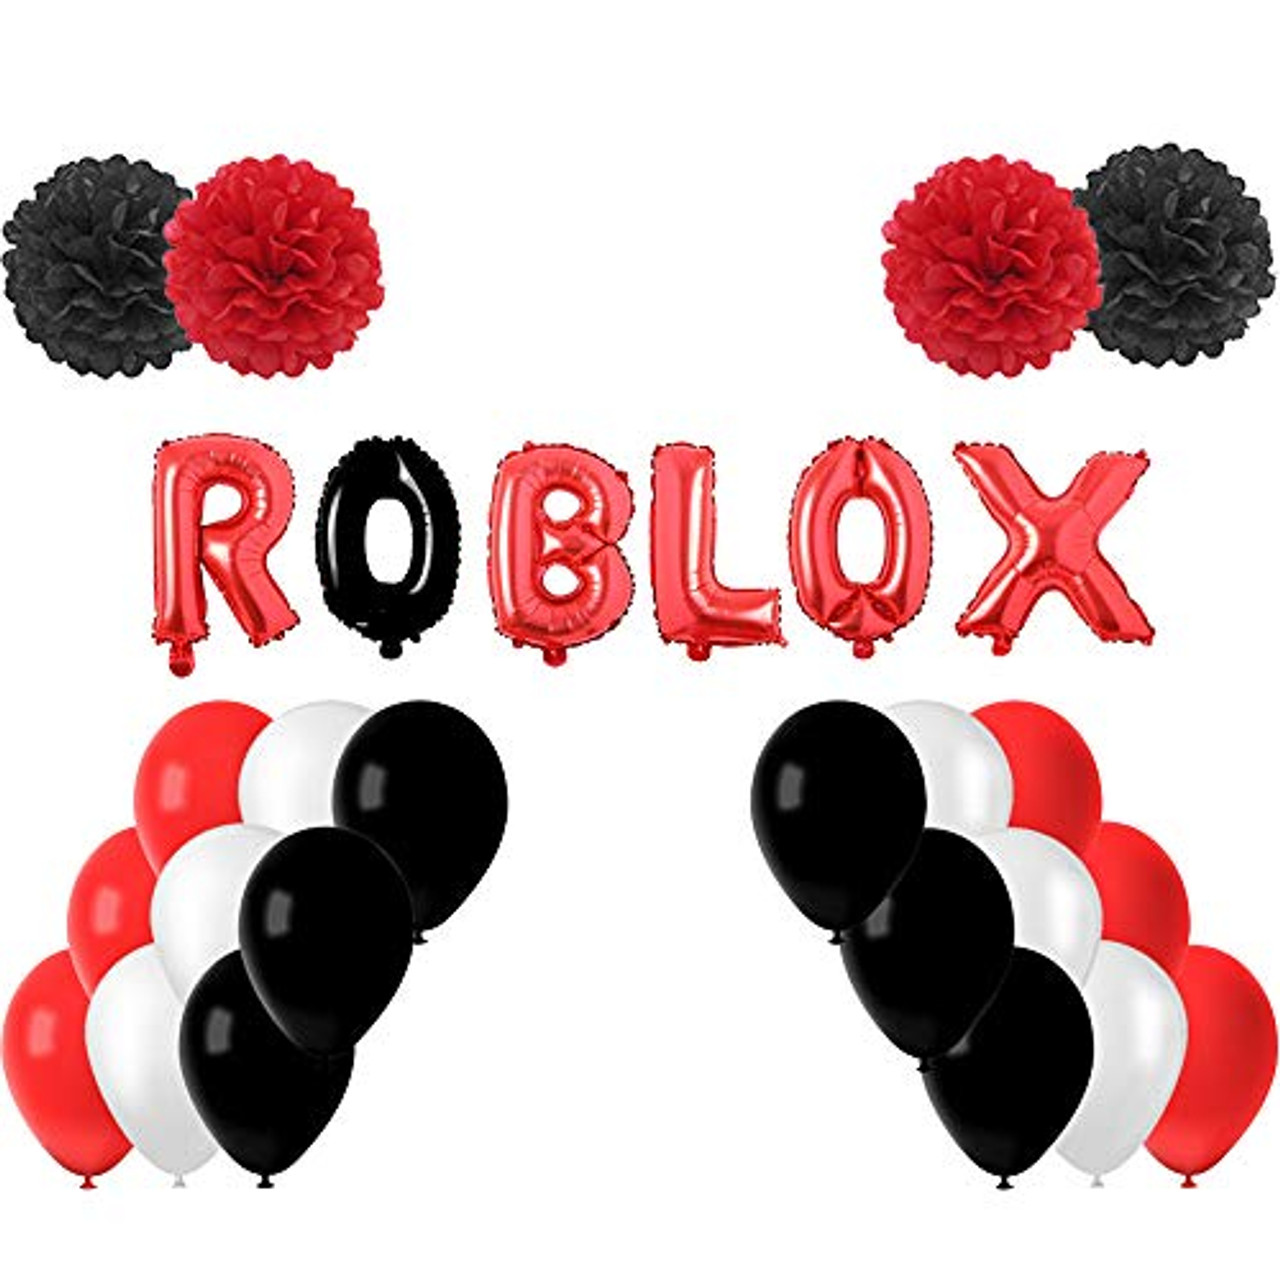 28 Counts Party Favors For Roblox Party Supplies Balloons Paper Flowers Decorations Game Theme Birthday Party Toyboxtech - supplies roblox party decorations